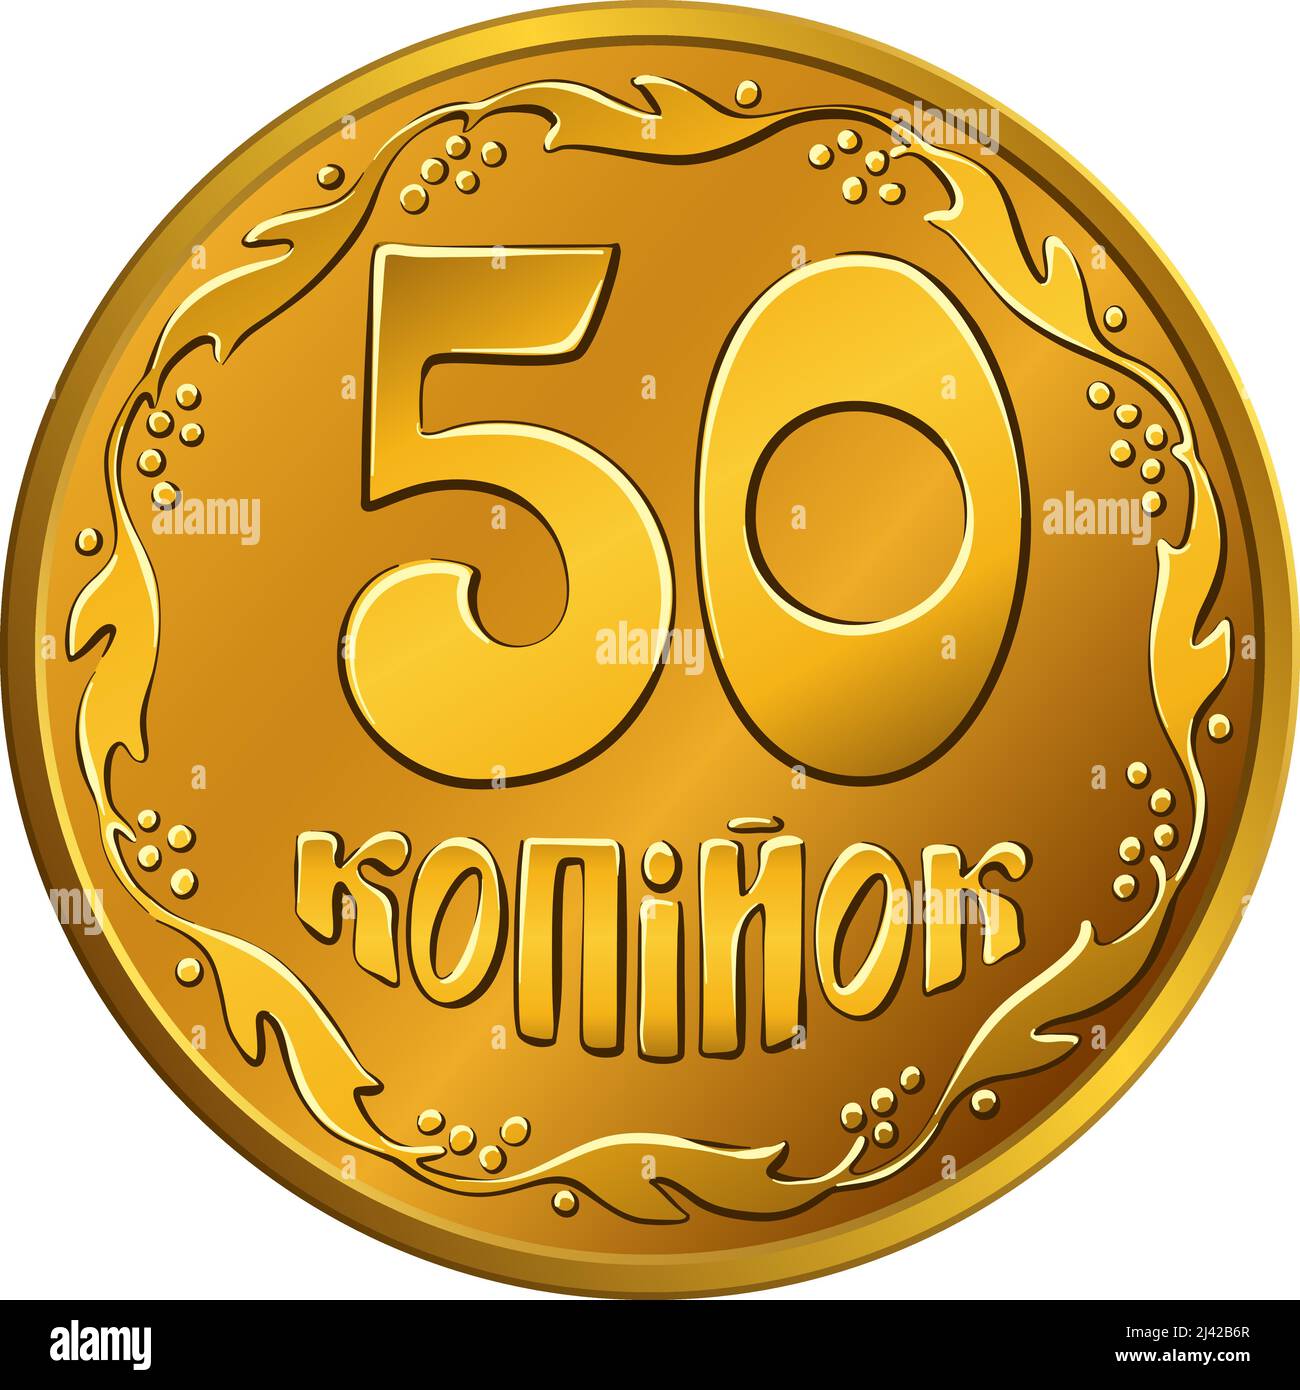 Ukrainian money gold coin 50 kopiyok, obverse with value and ornament of stylized branches Stock Vector